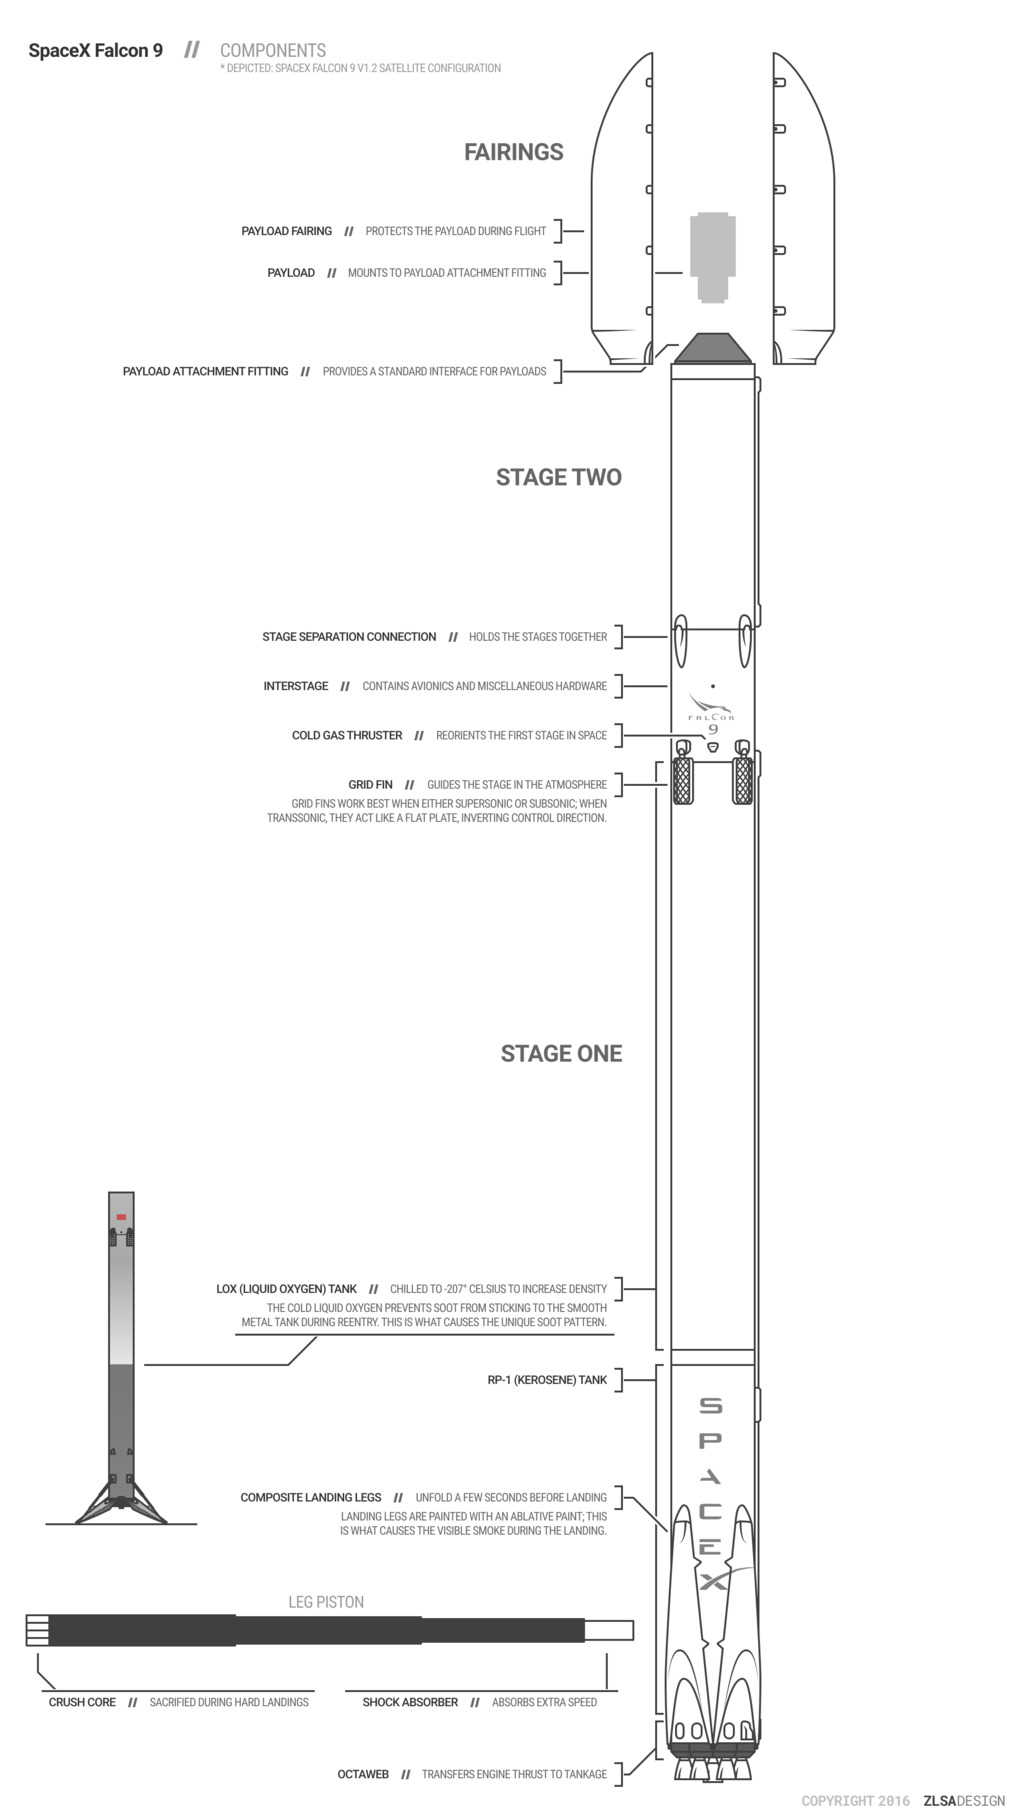 SpaceX Falcon 9 Components